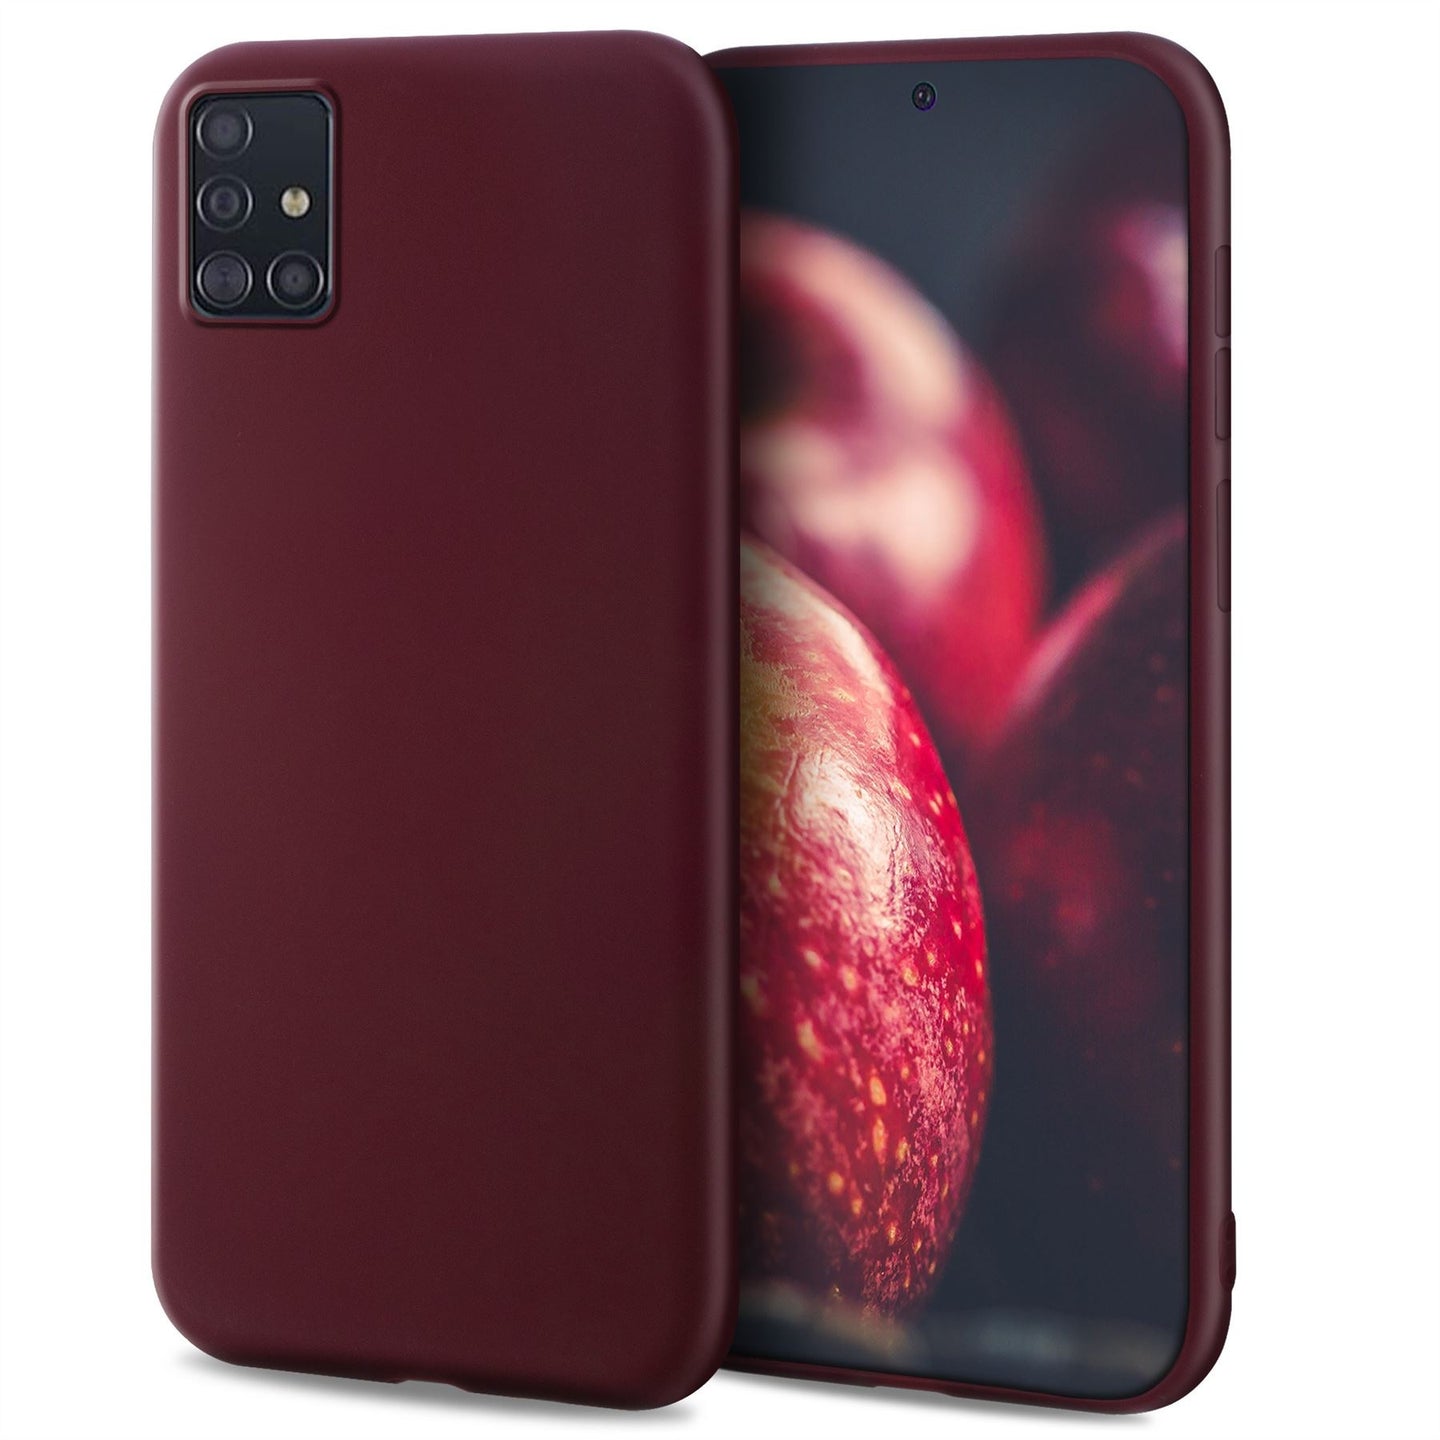 Moozy Minimalist Series Silicone Case for Samsung A71, Wine Red - Matte Finish Slim Soft TPU Cover